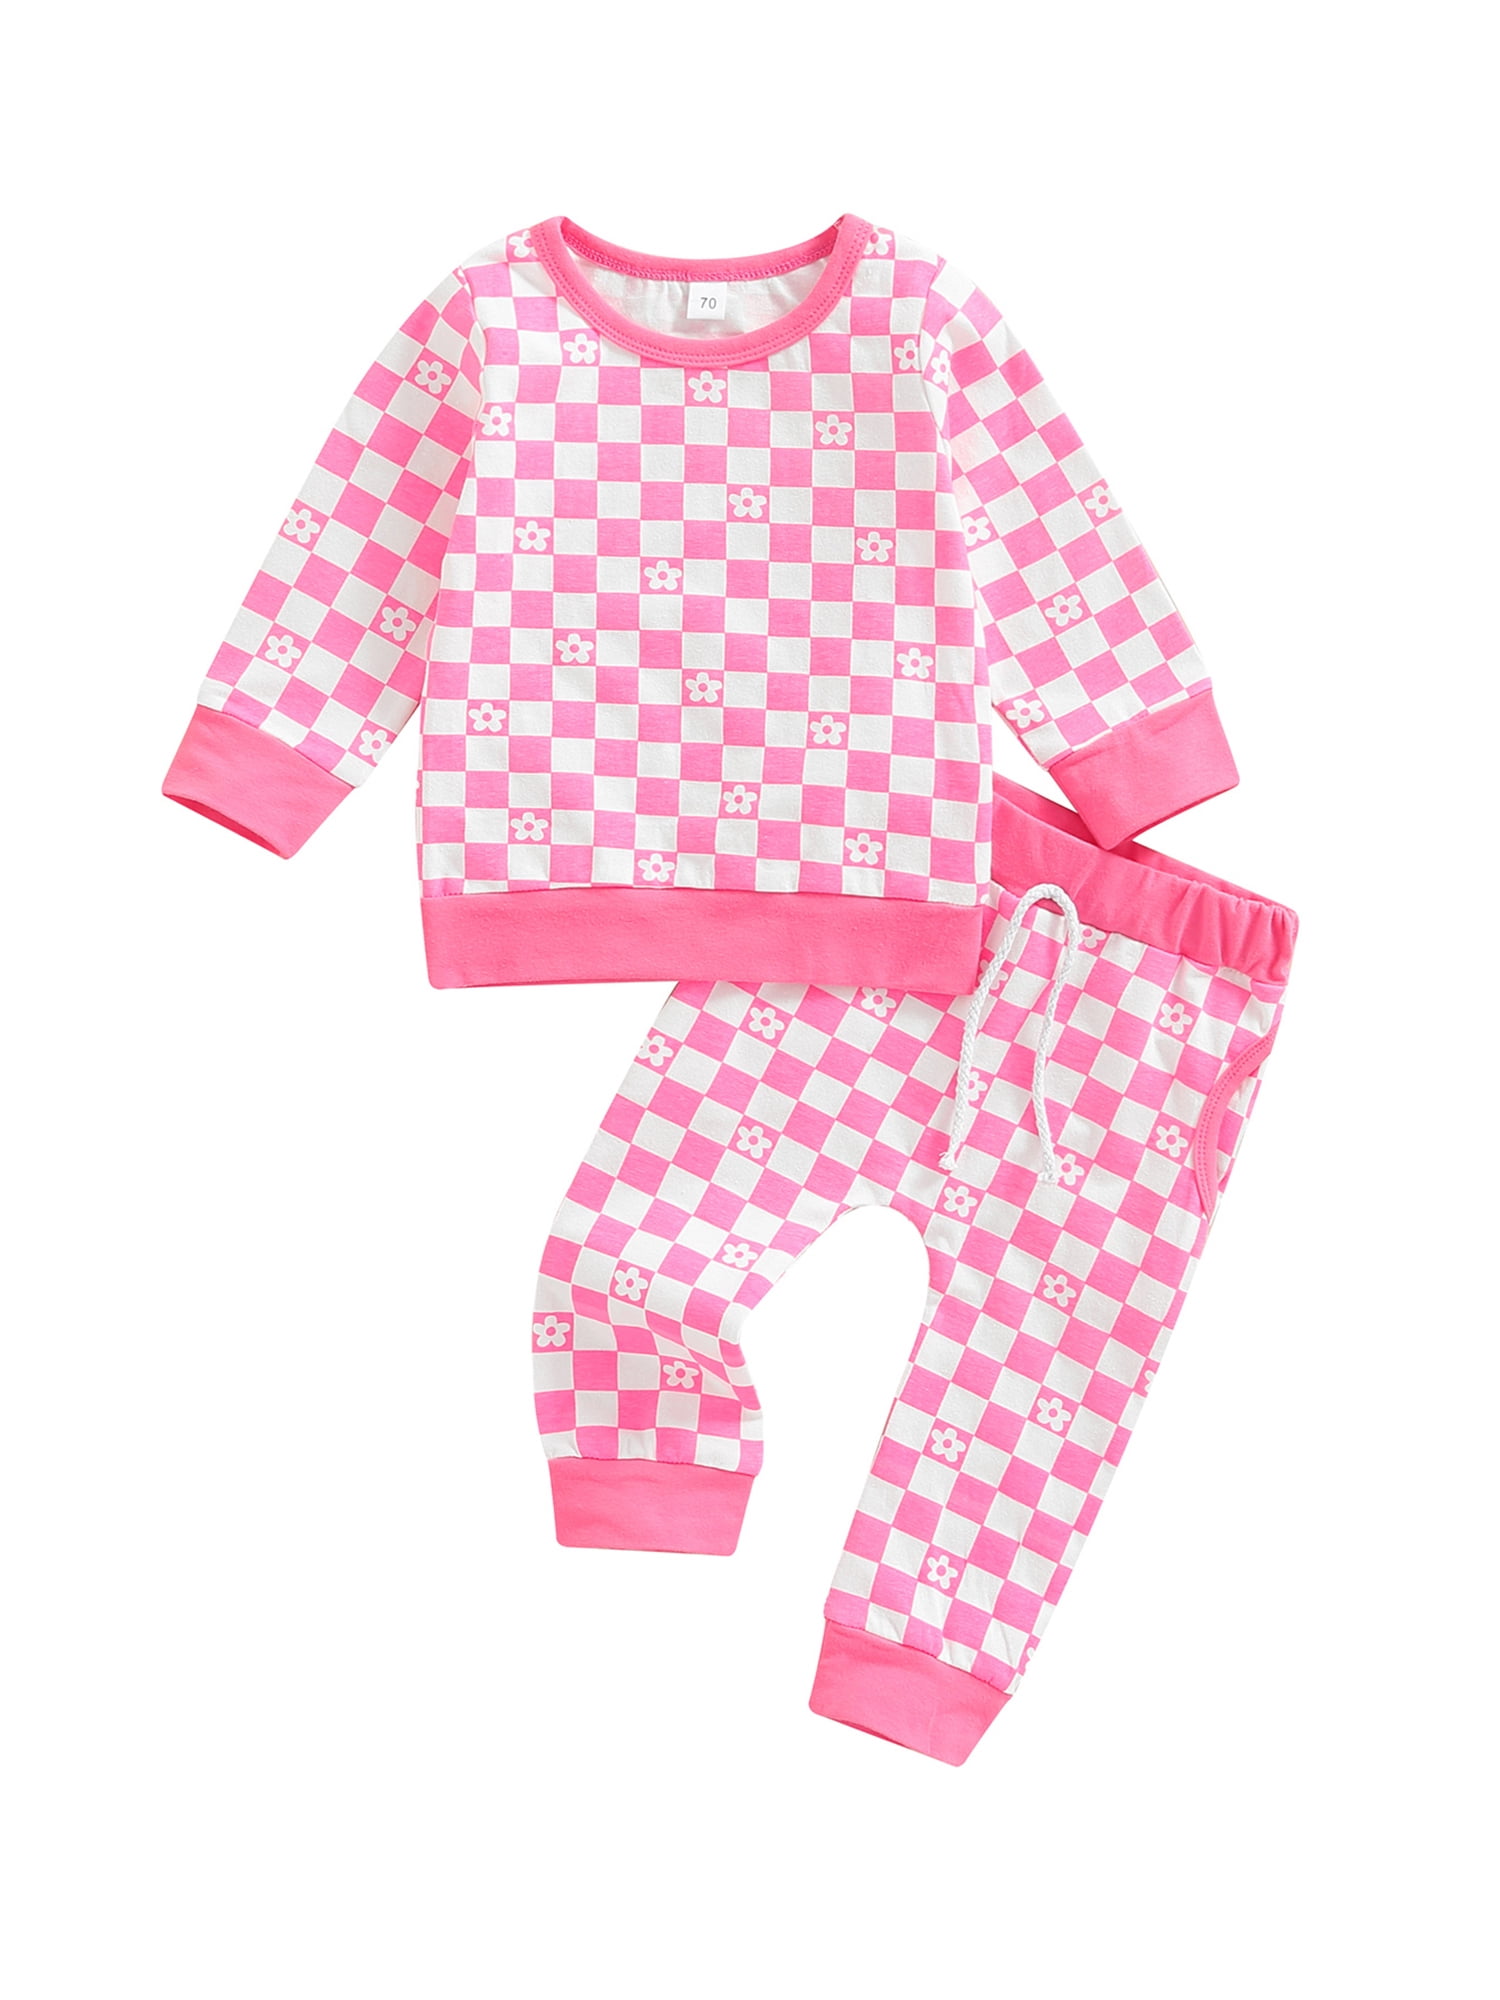 AMILIEe 2 Pieces Infant Baby Girls Suit Set, Checkerboard Print Long Sleeve  Tops+ Long Pants 